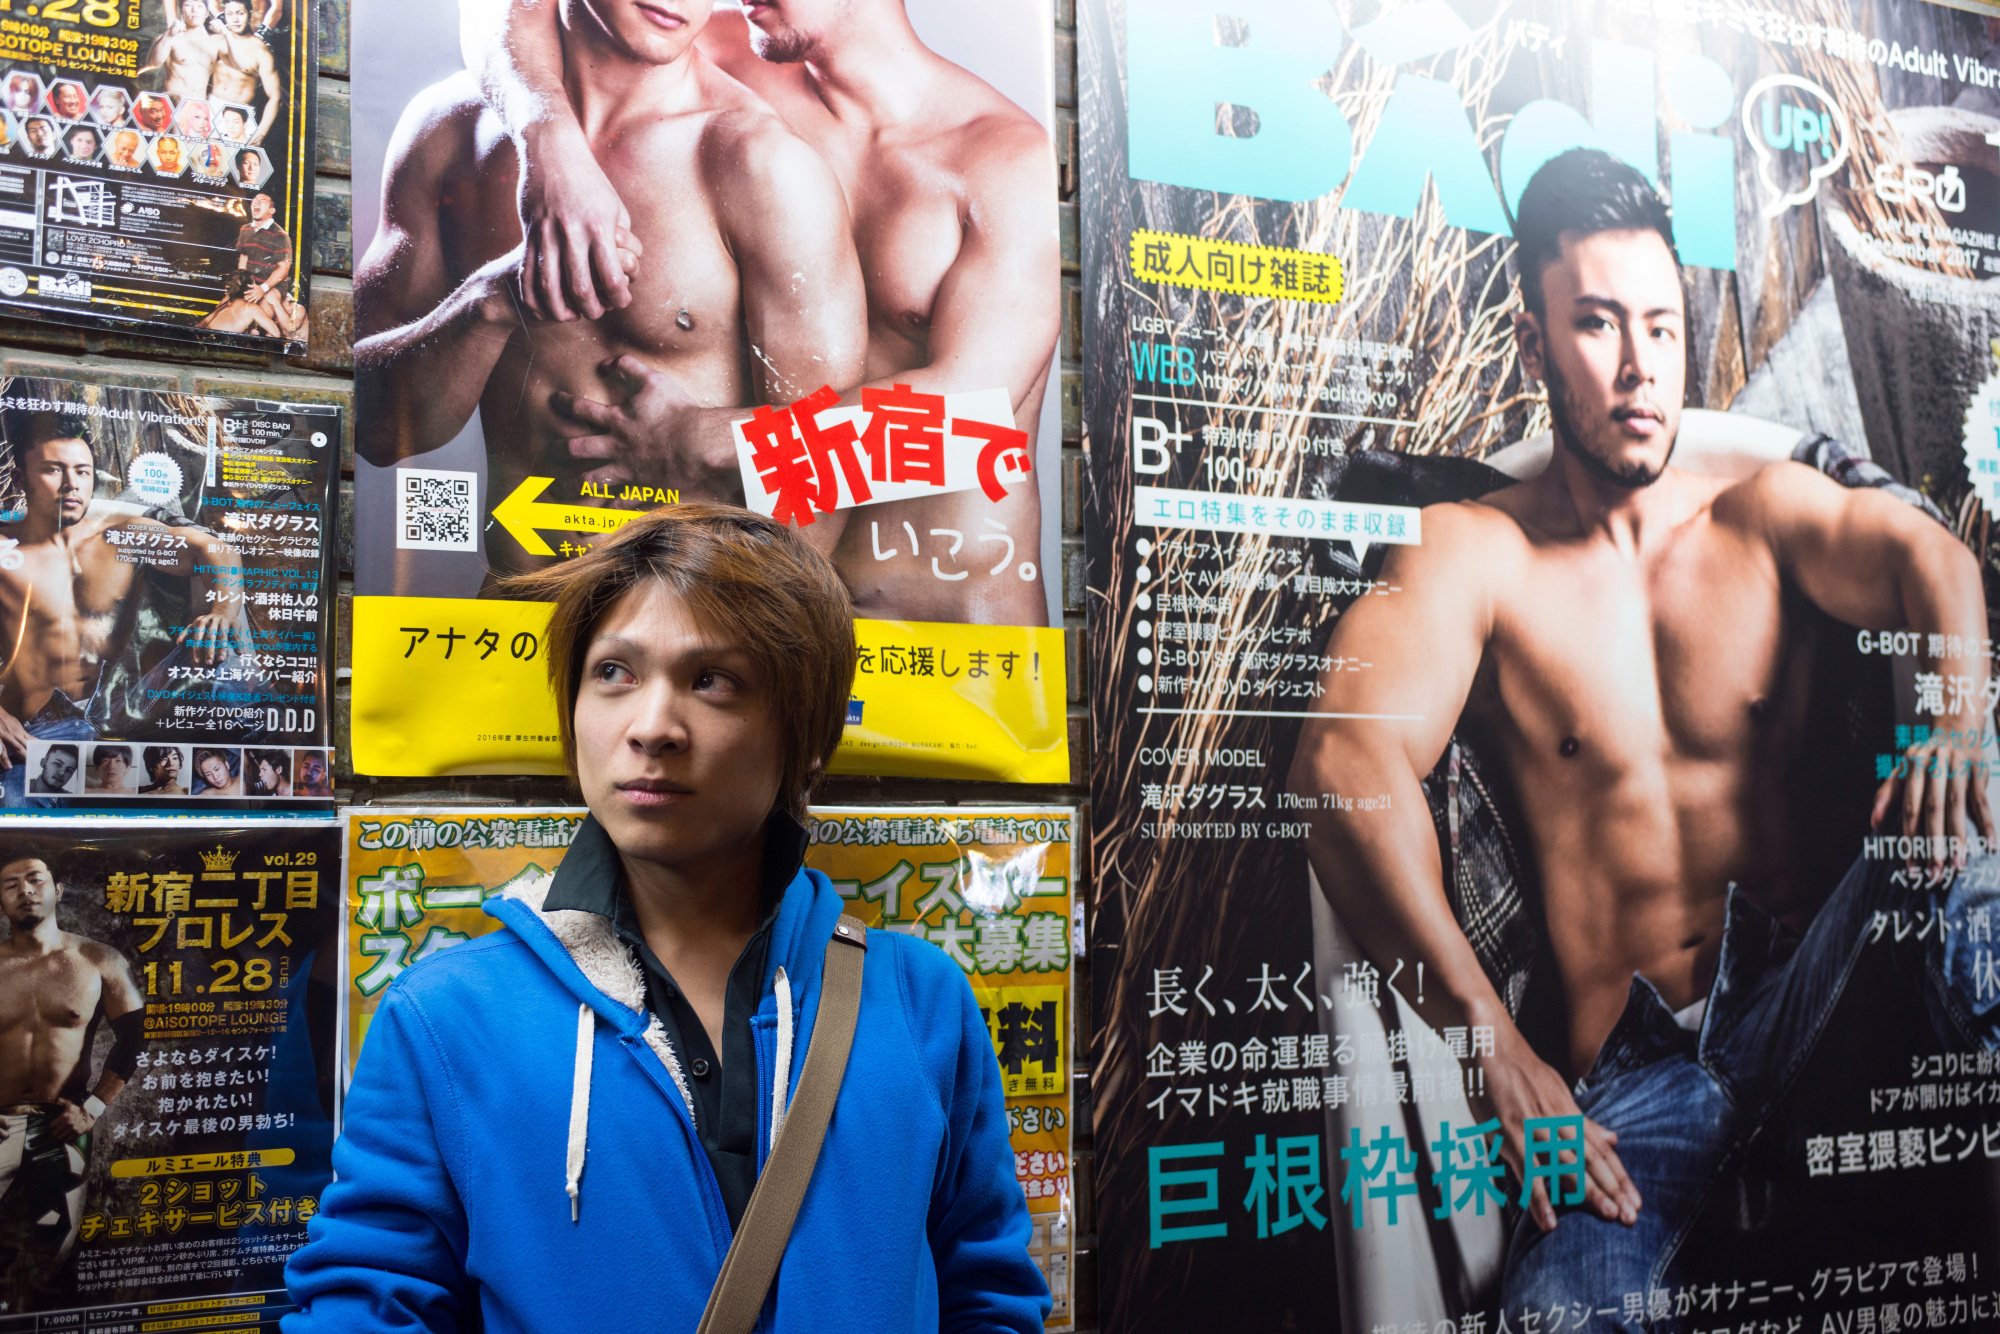 Boys for rent in Tokyo Sex, lies and vulnerable young lives image photo